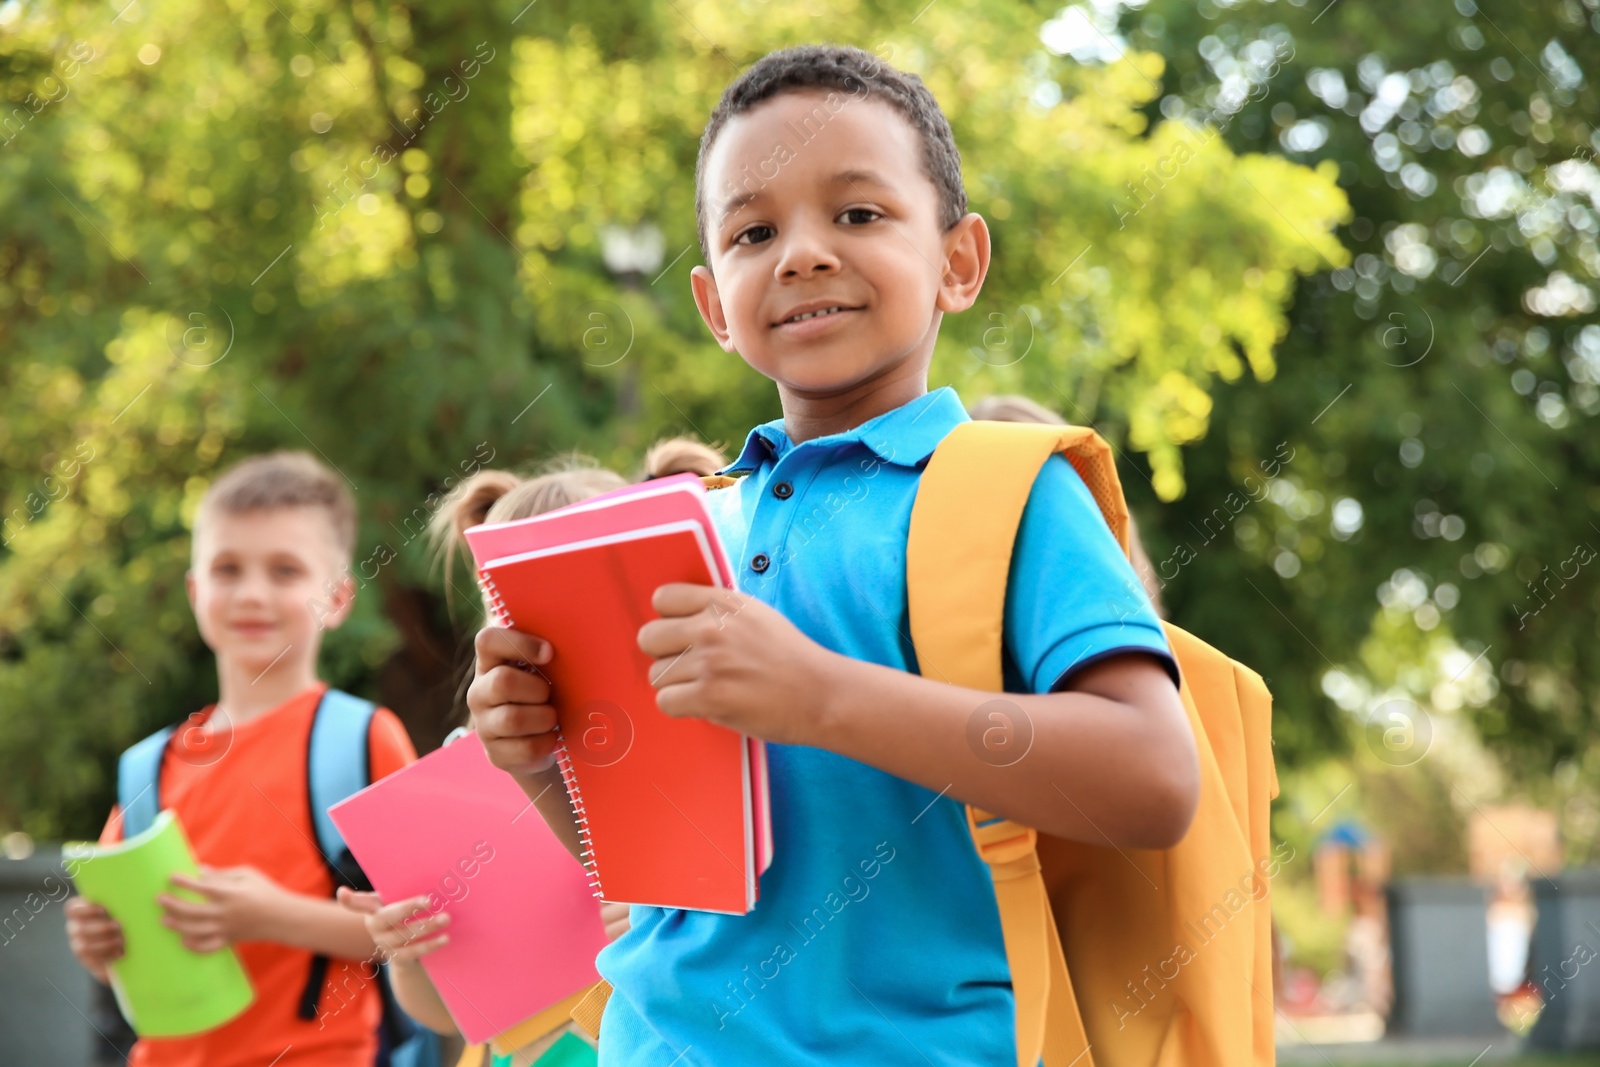 Photo of Cute little child with backpack and notebooks outdoors. Elementary school